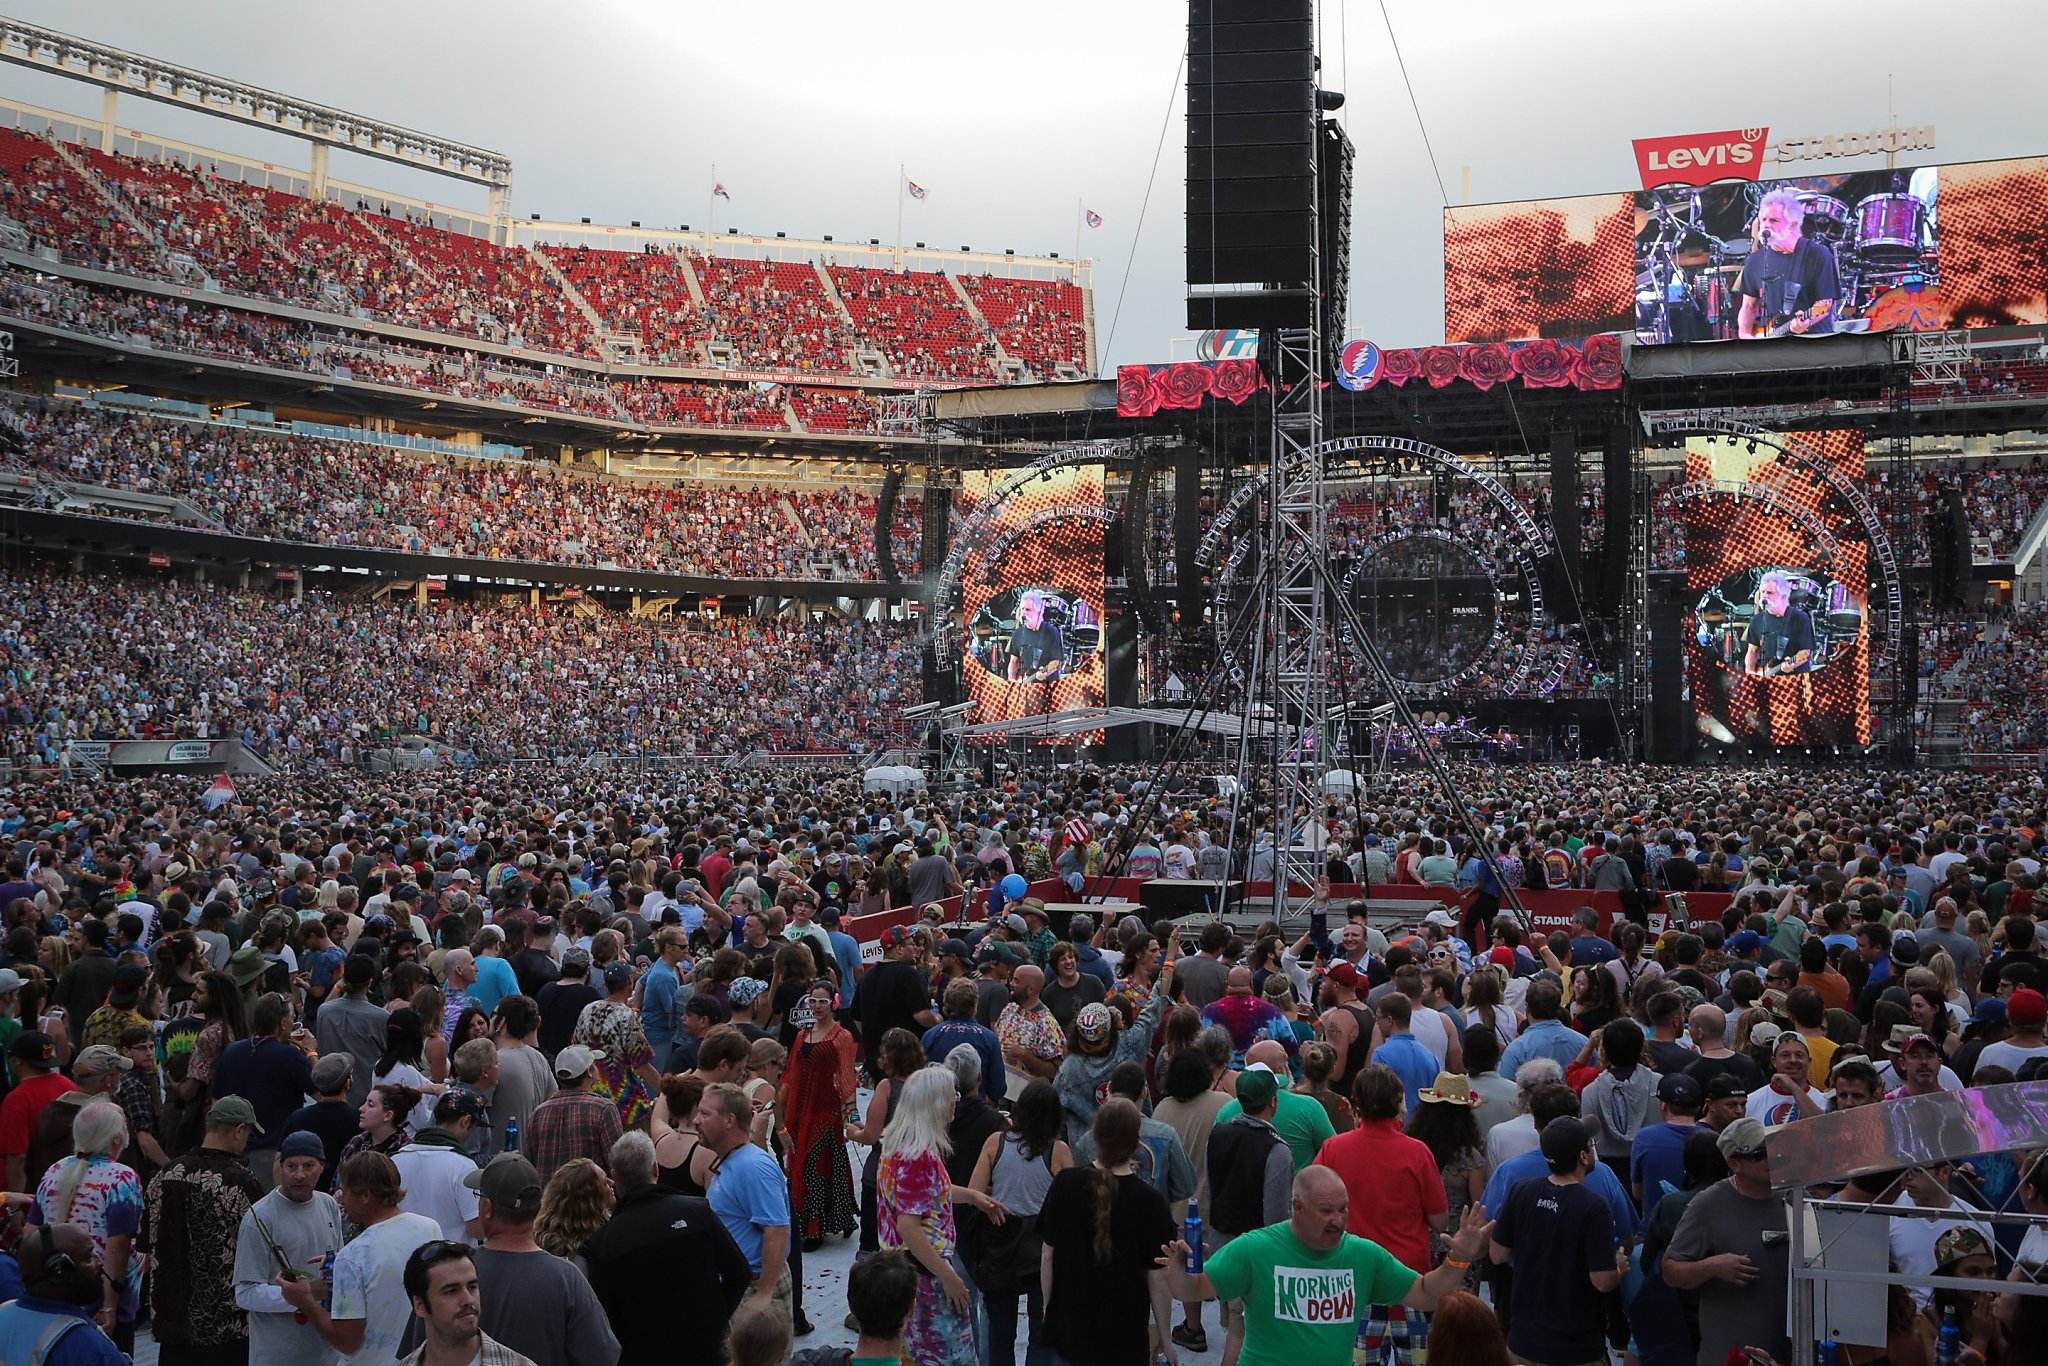 Petition calls for the Grateful Dead to play Super Bowl half-time show